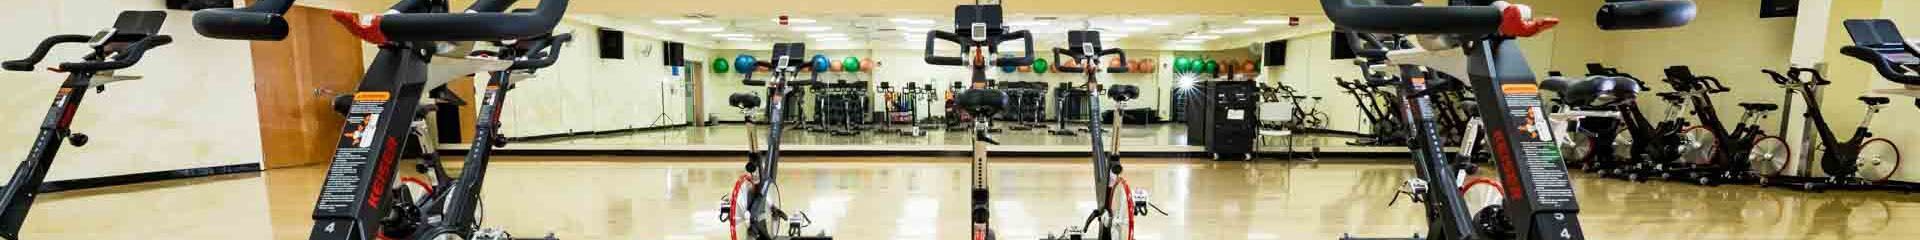 Panoramic view of cycling machine in the gym